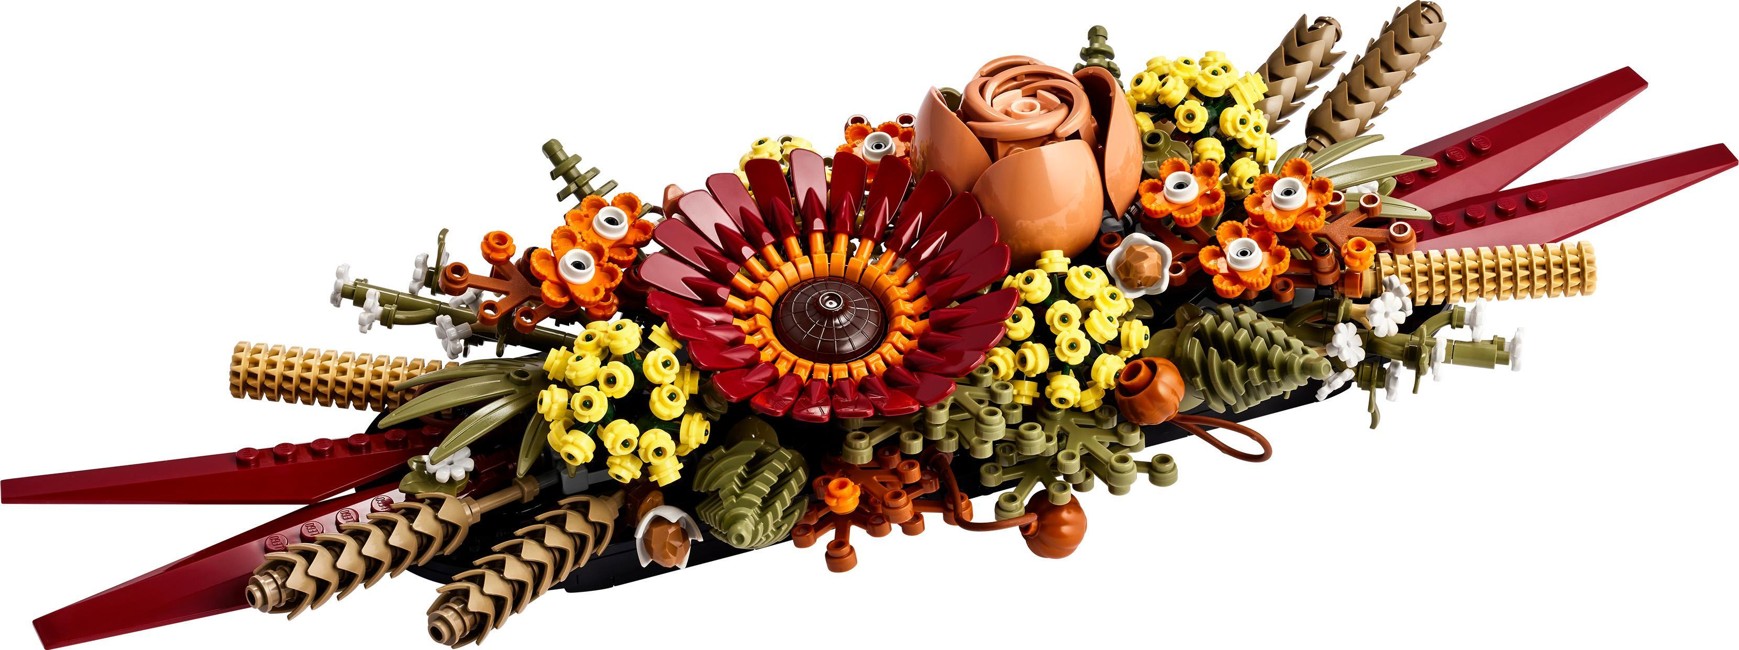 LEGO Icons - Dried Flower Decoration (10314)